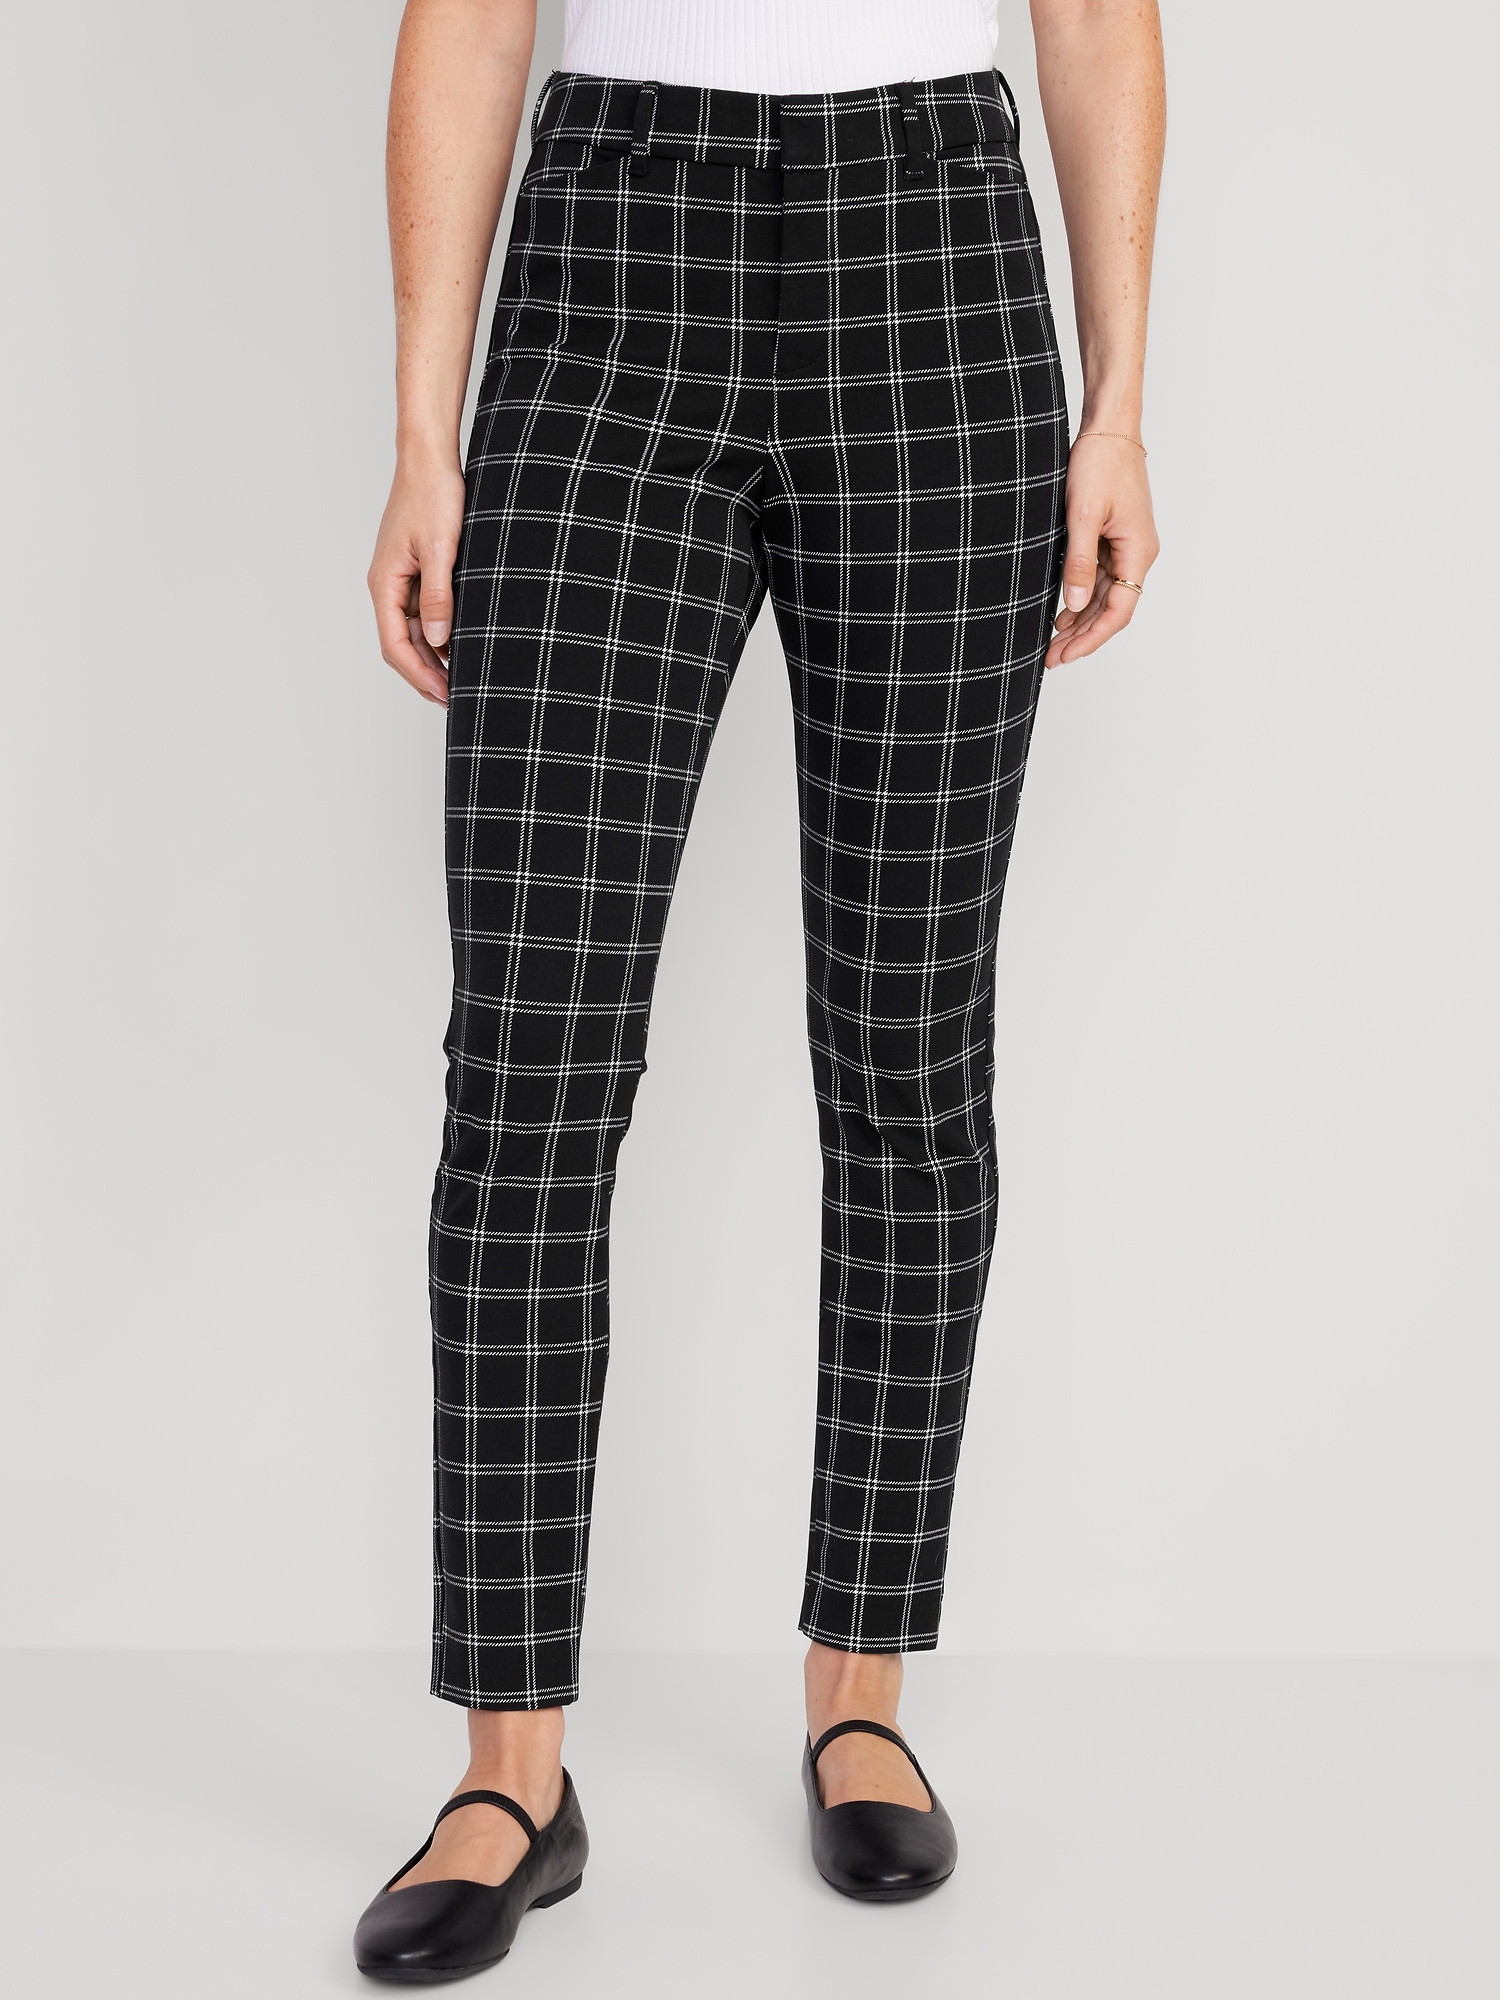 Old Navy, Pants & Jumpsuits, Old Navy Houndstooth Pixie Pants Size Tall